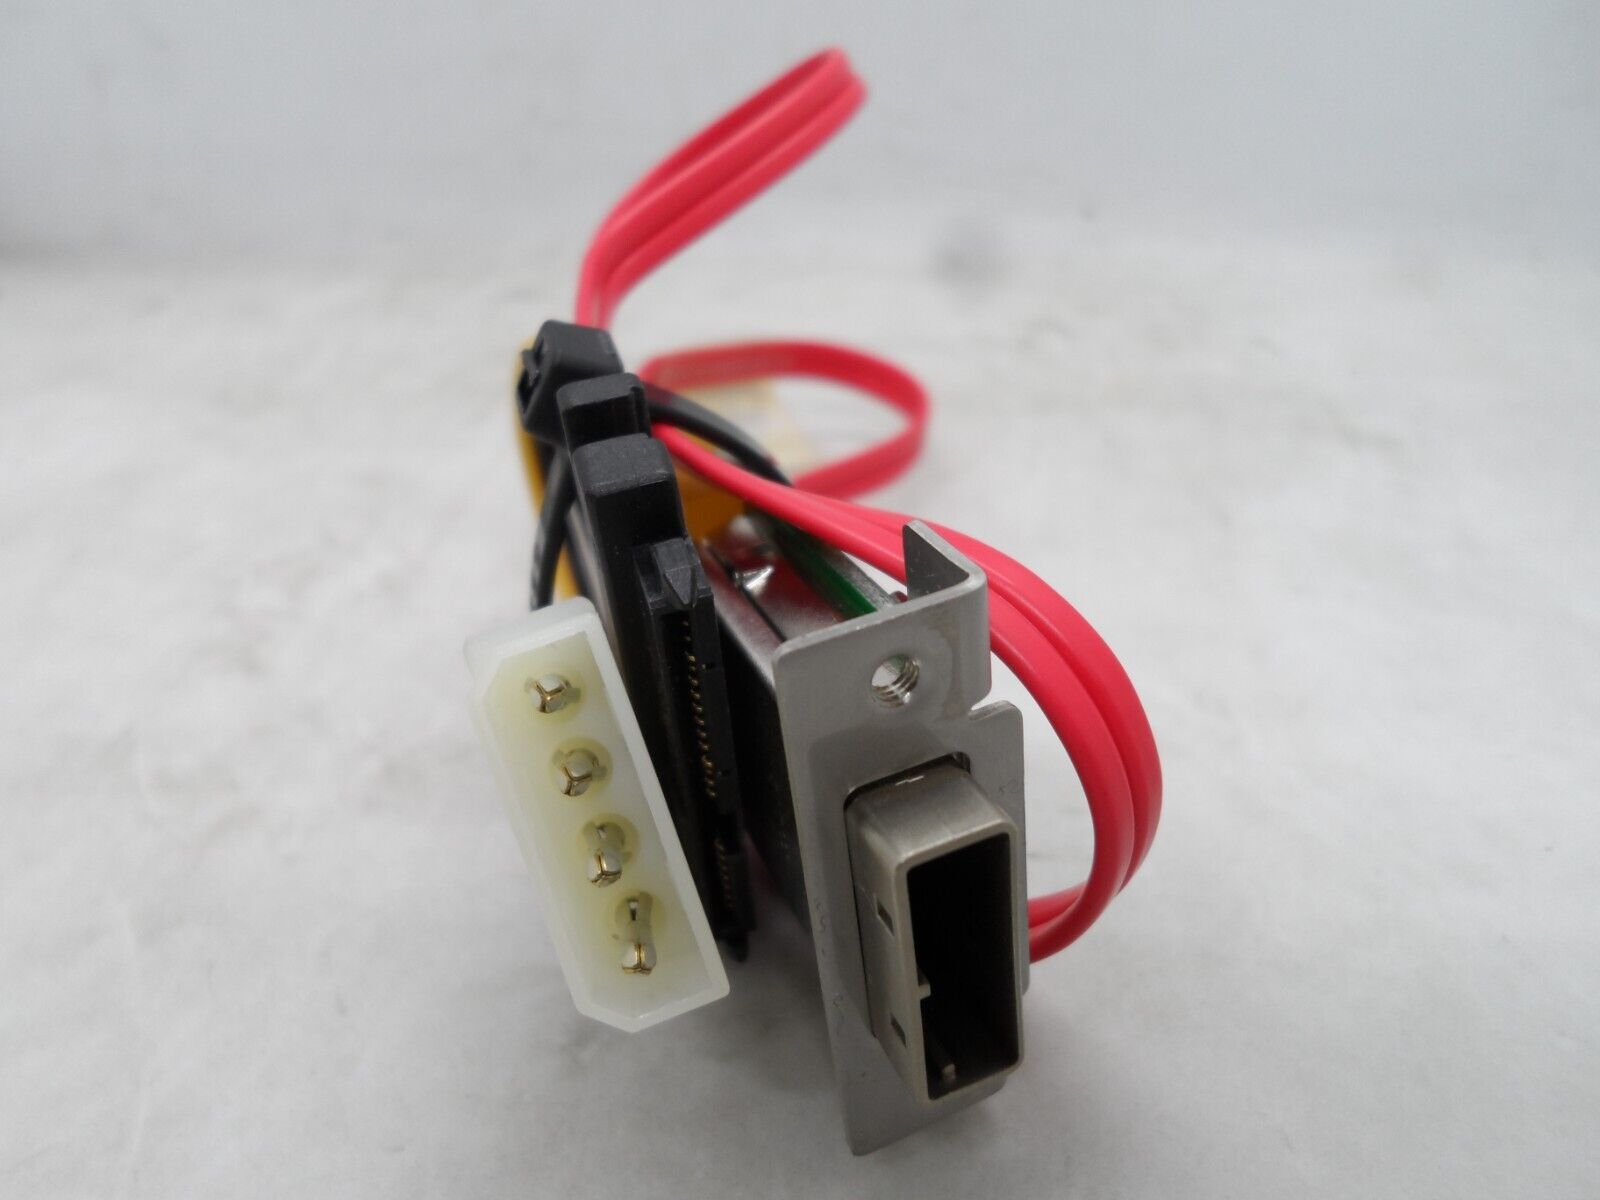 IBM 46C2115 Single SAS Interface and power red color cable for PV114X 2U